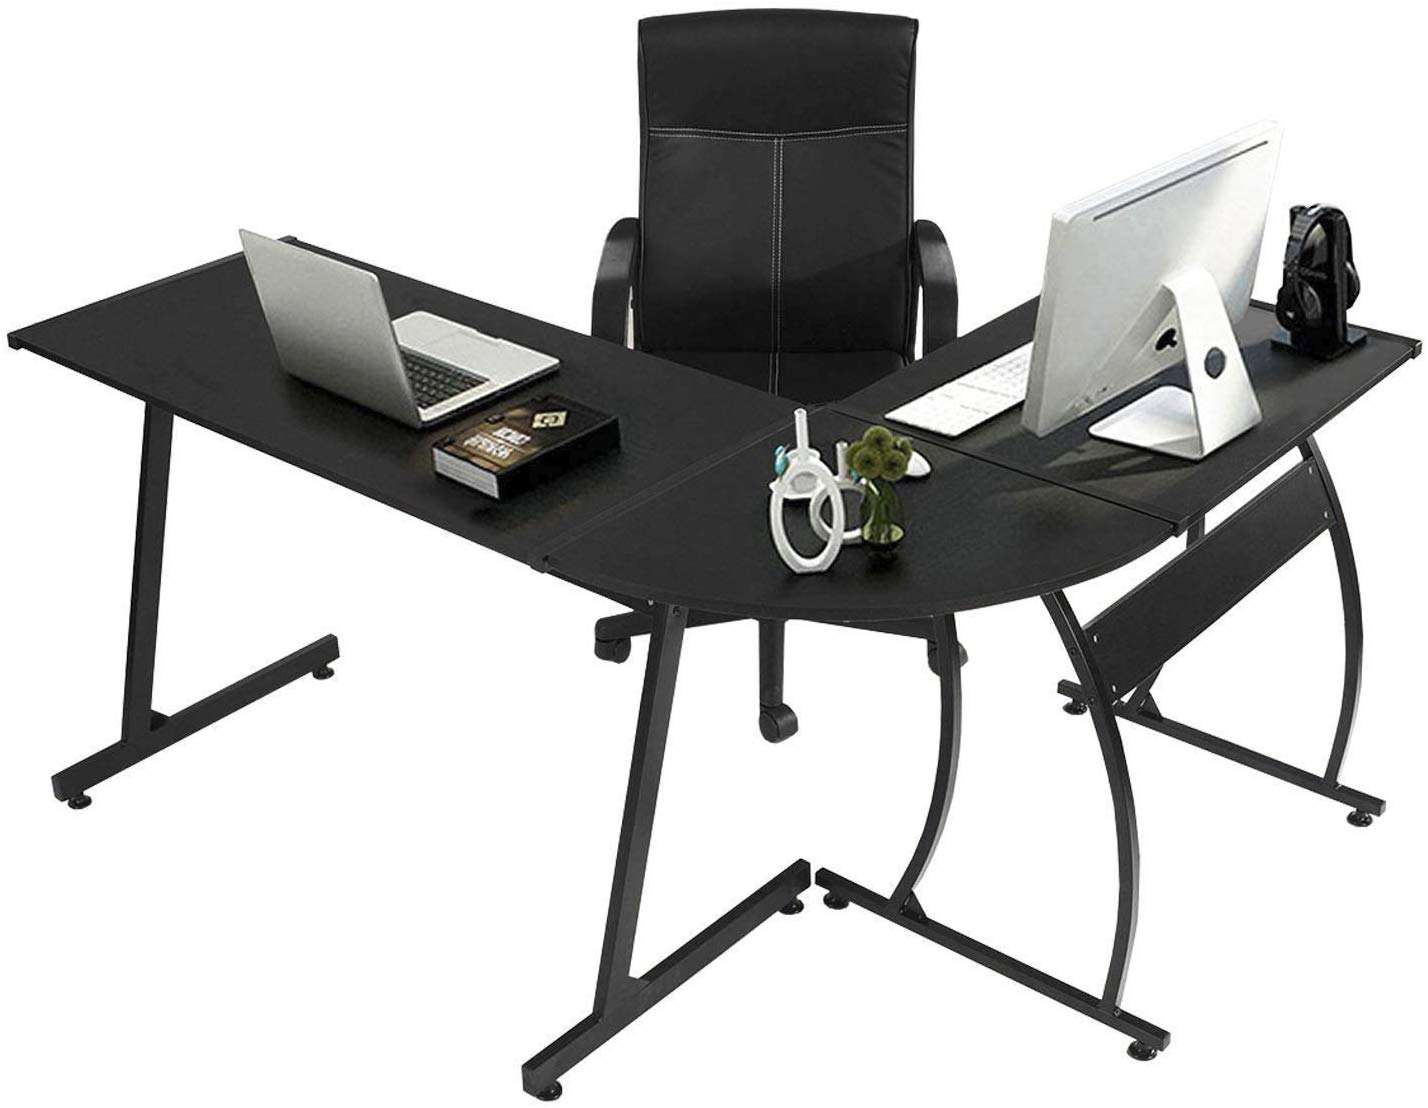 Home Office Gaming: A Table to Go from Working to Gaming and Back